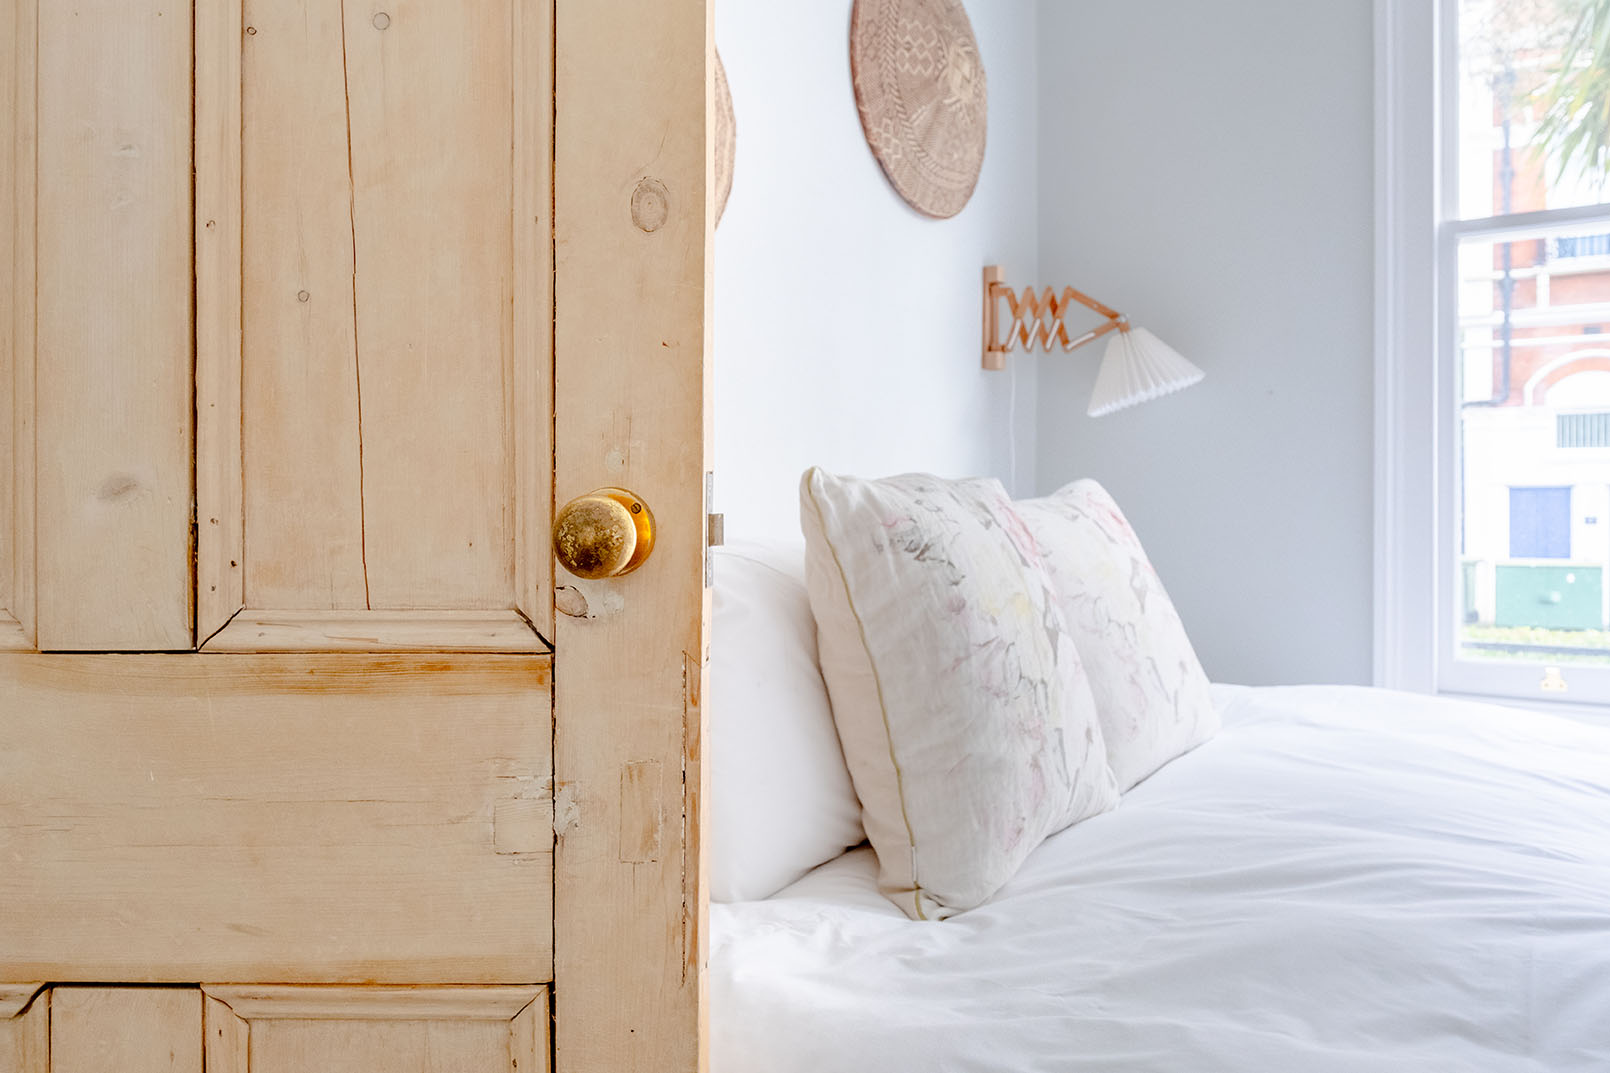 Detail of a bedroom for property photography, a wooden door close up shot, a double bed seen on the background with decorative cushions